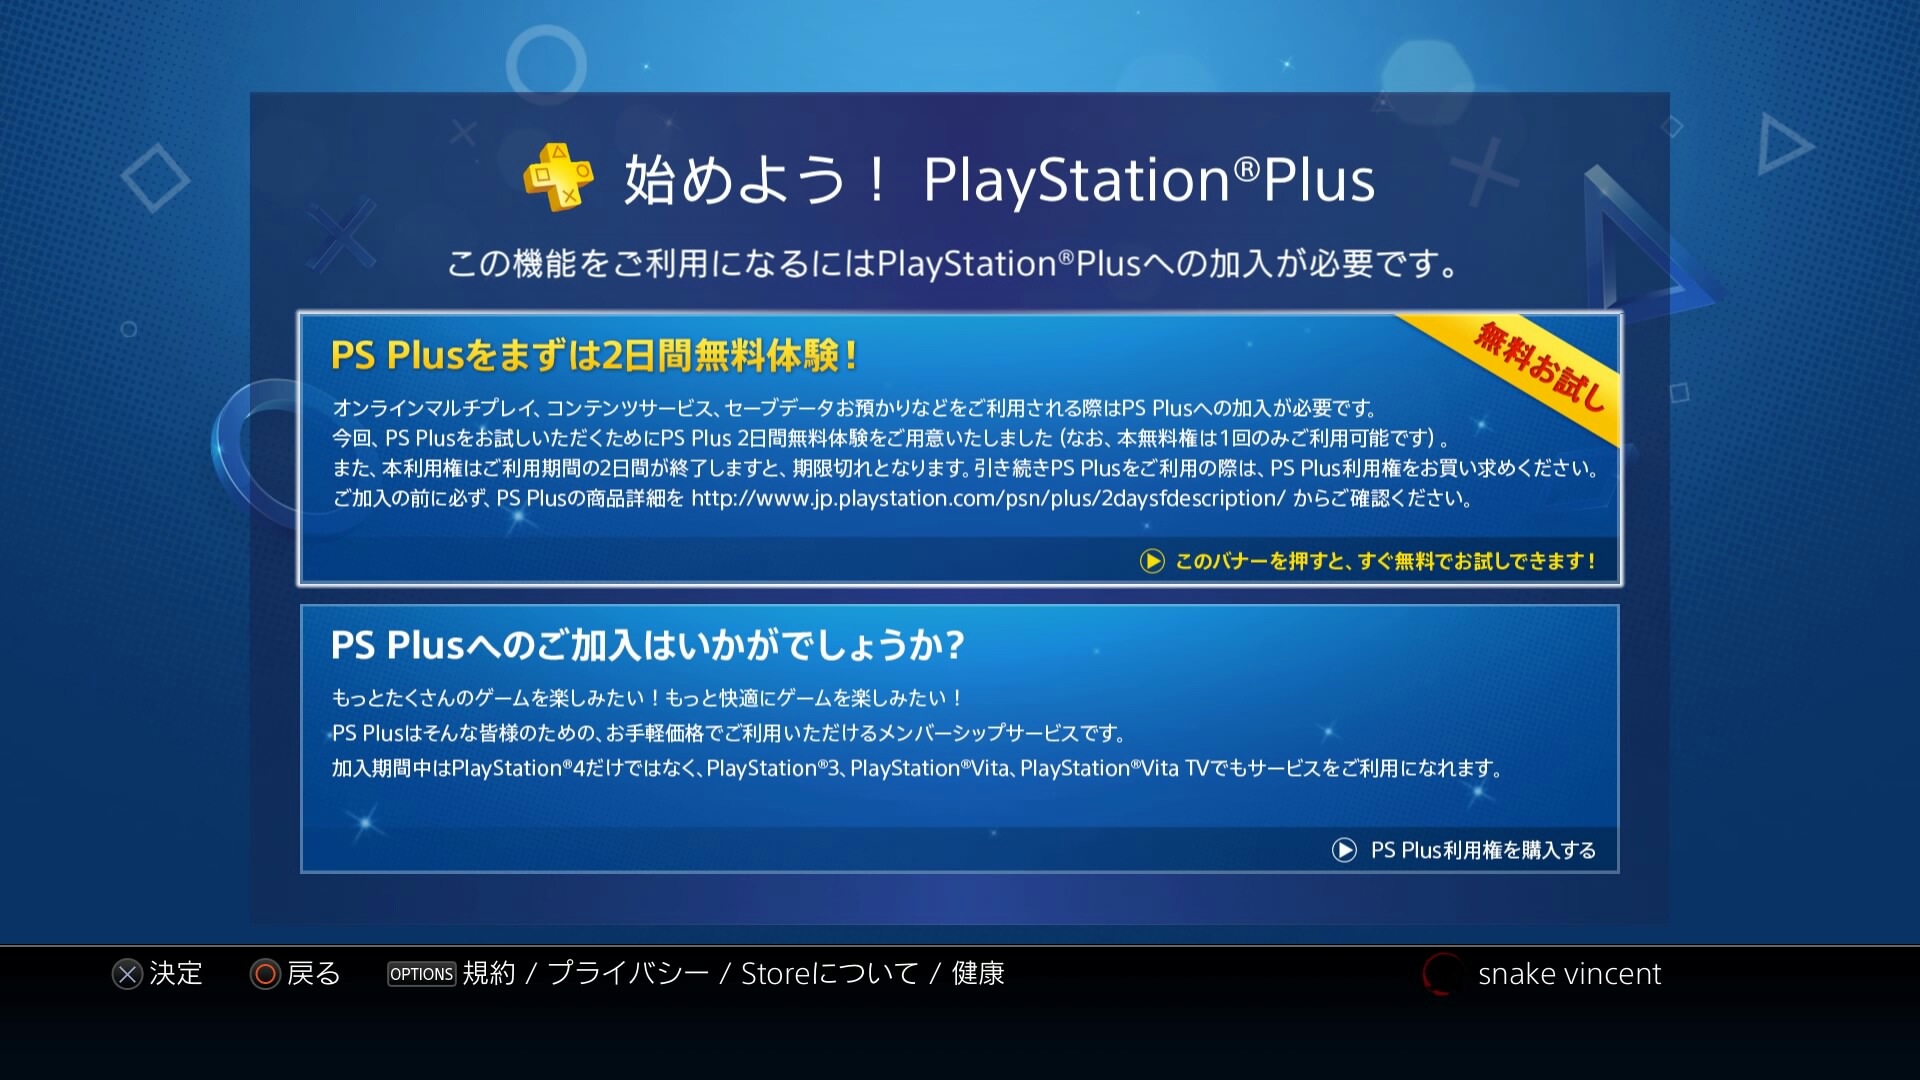 playstation plus 1 day